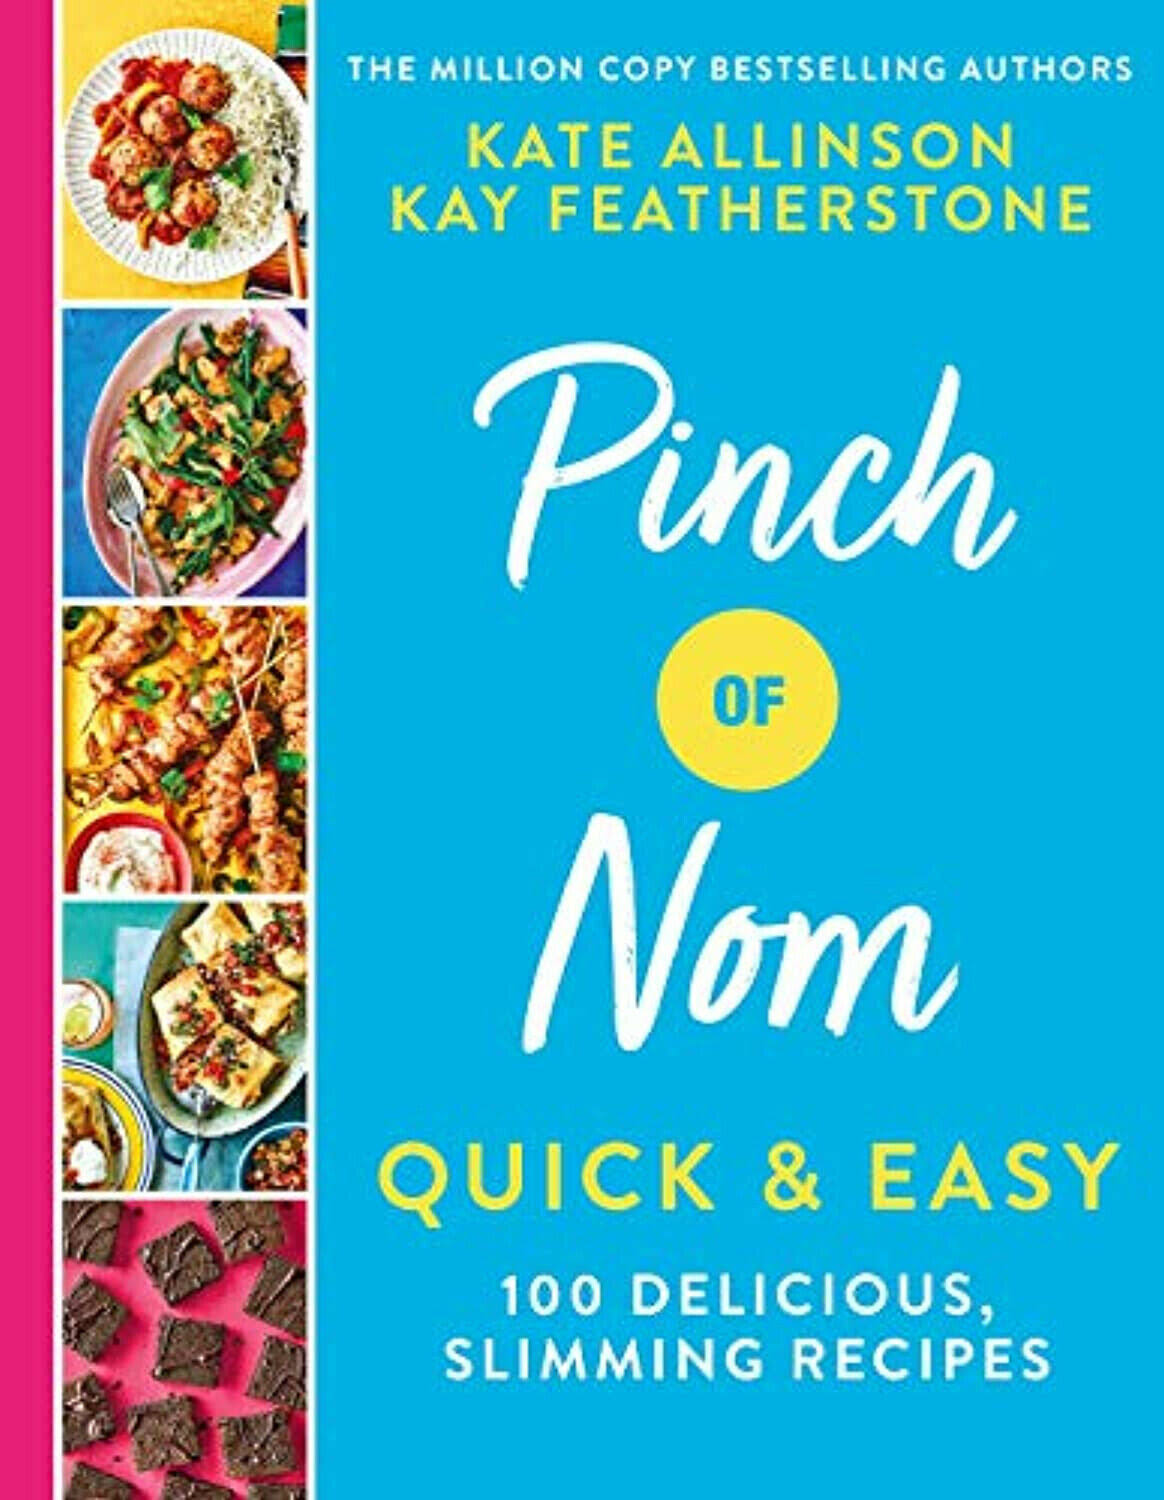 Pinch of Nom Quick and Easy [Book]